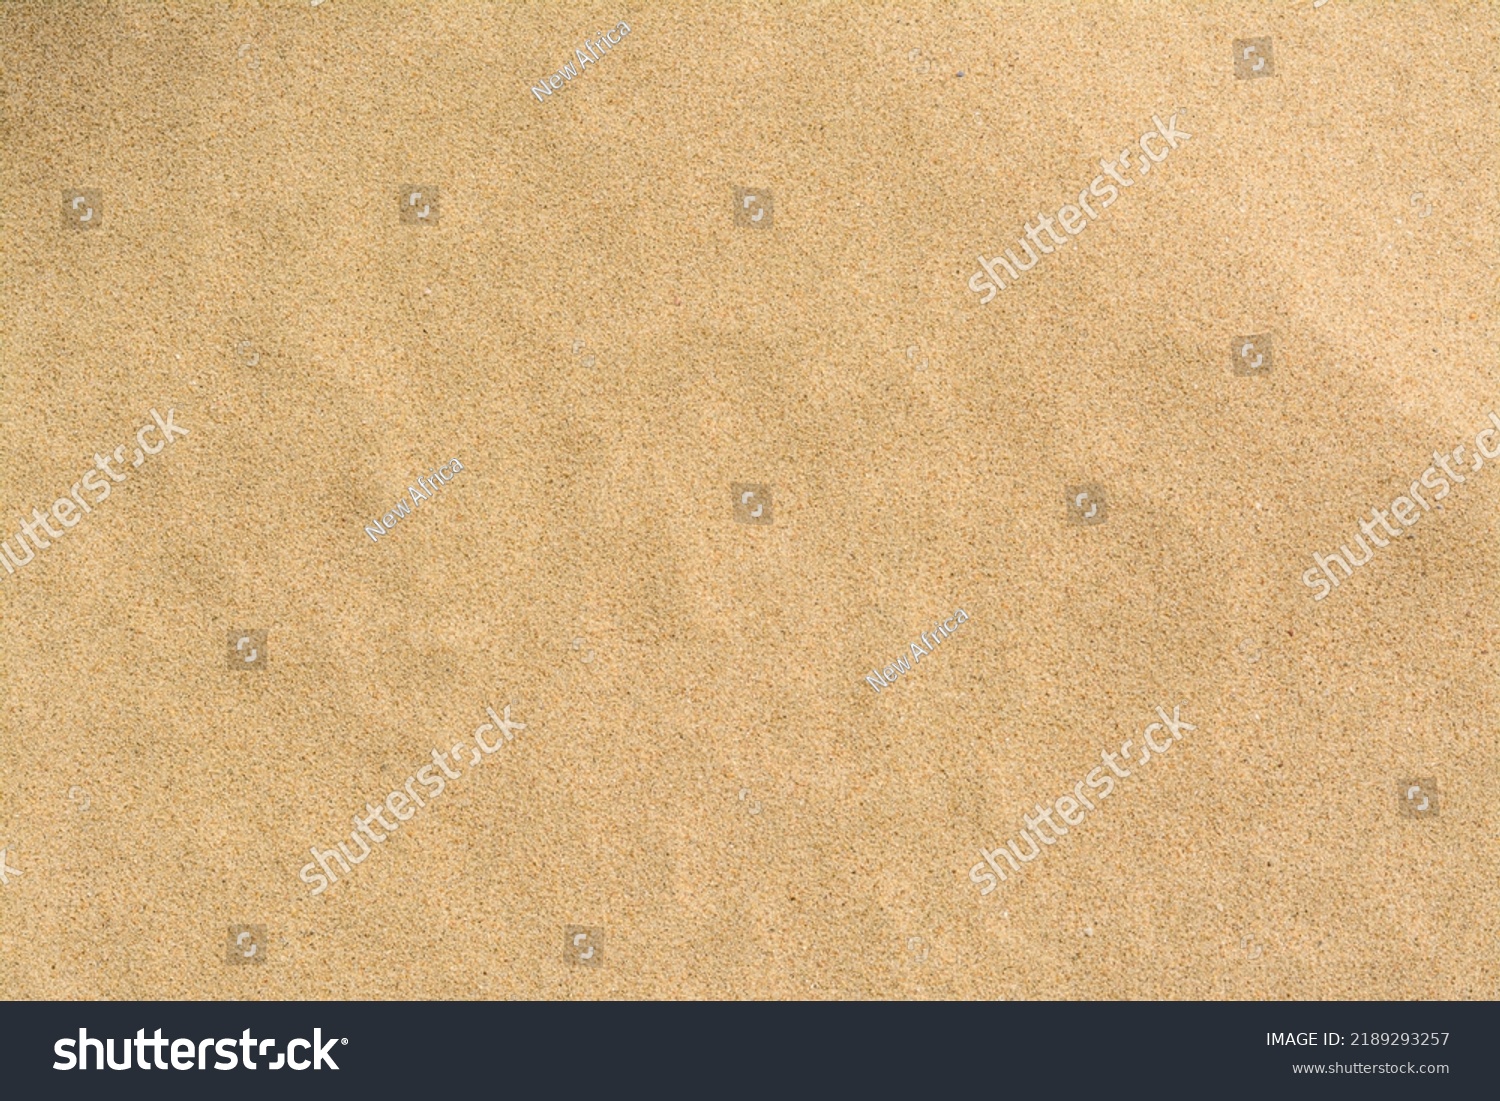 Texture of sandy beach as background, top view #2189293257